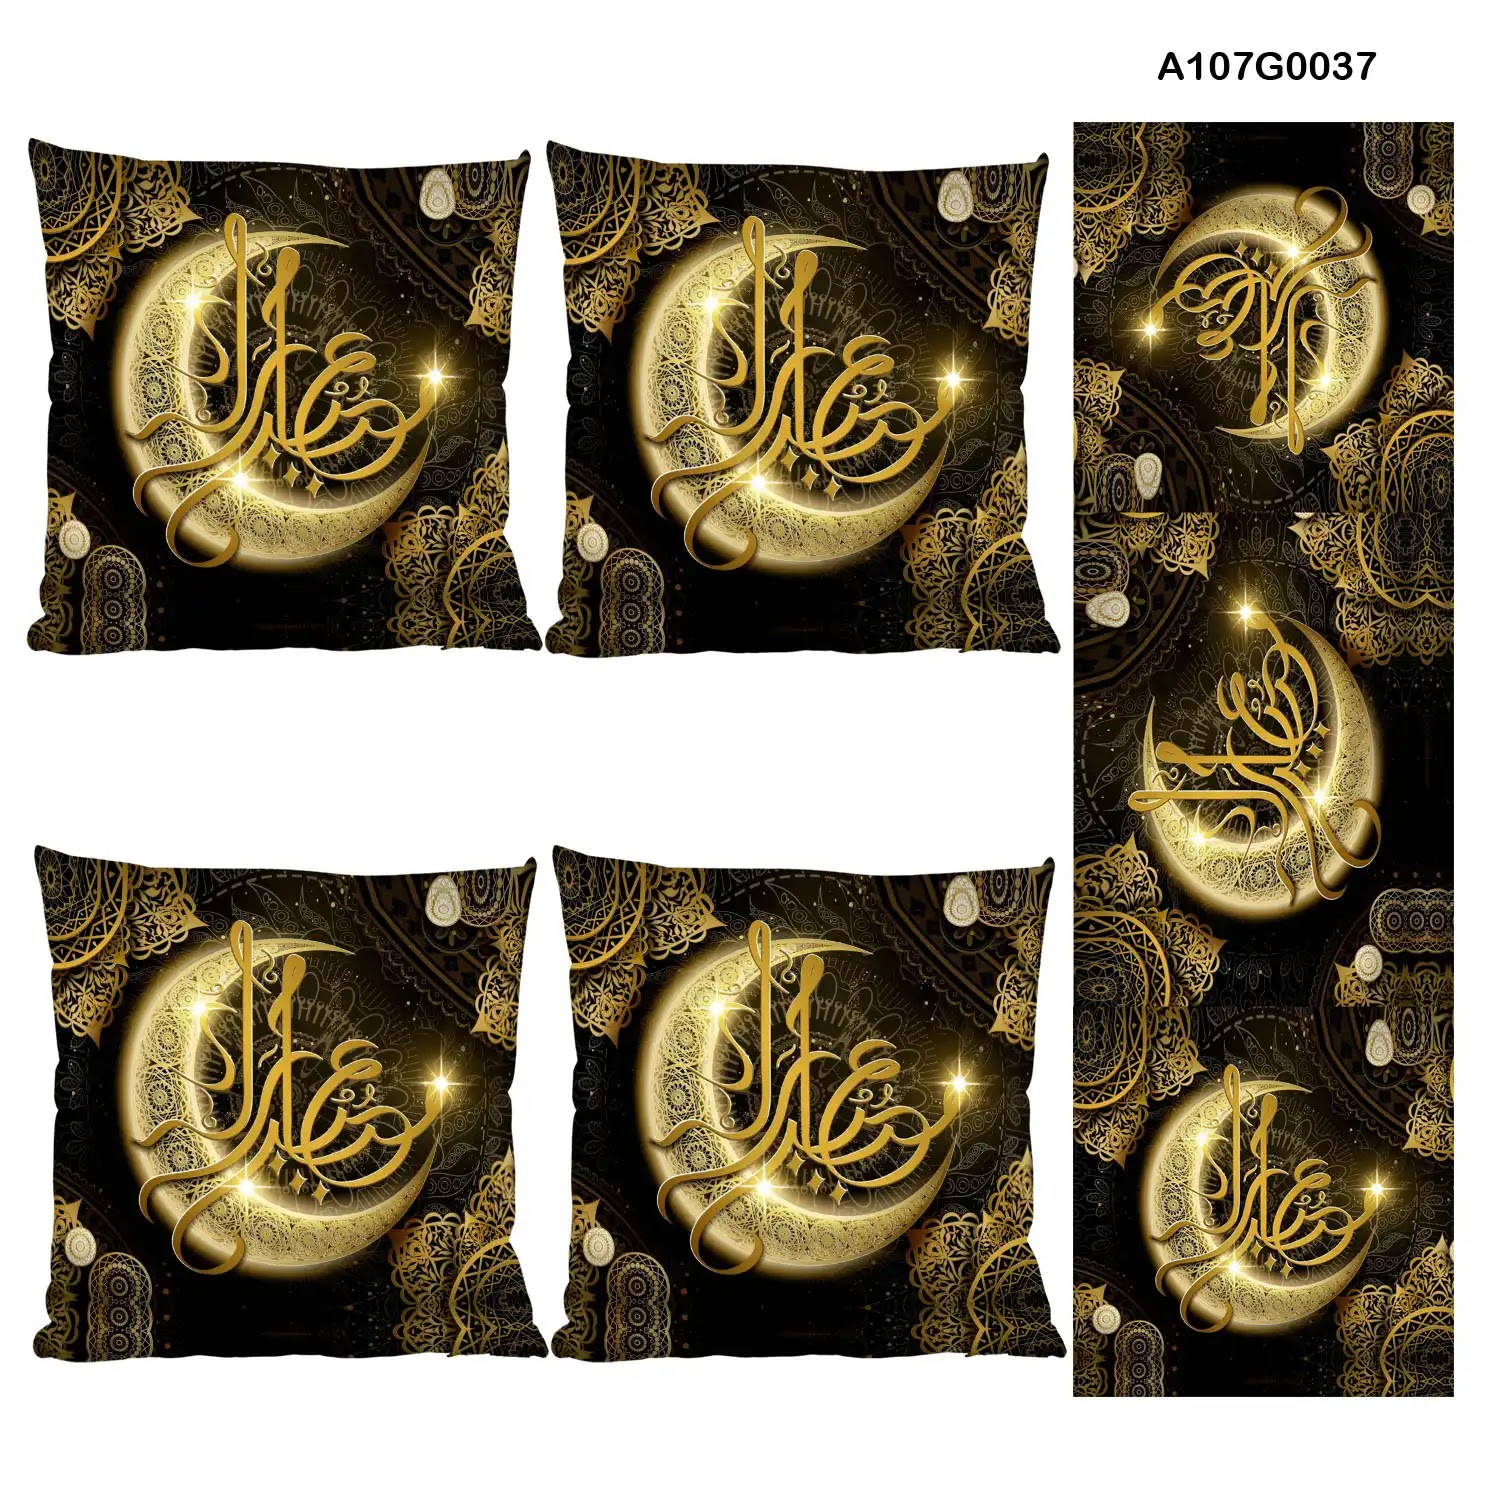 Black Pillow cover set & table runner with gold Ramadan Crescent drawing